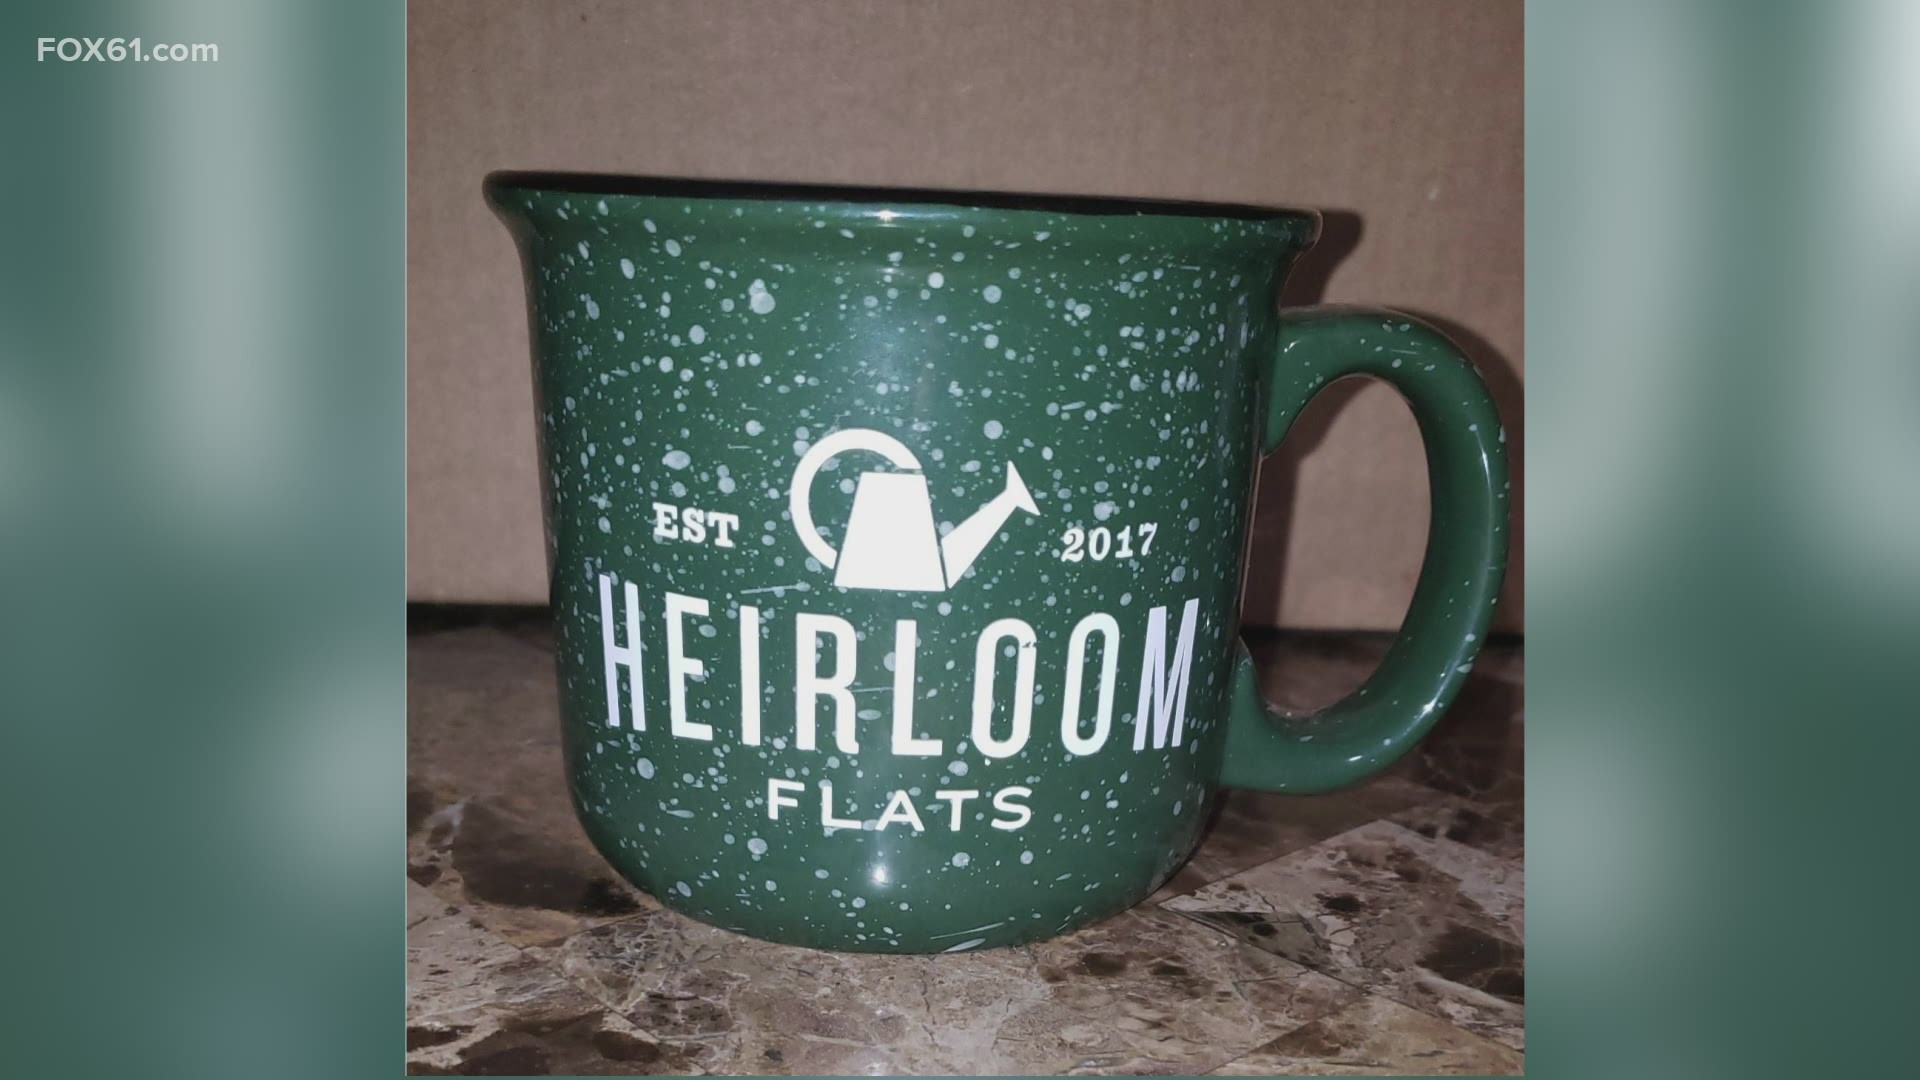 You can send a picture of your company's mug, post with the hashtag #share61 or email us at share61@fox61.com